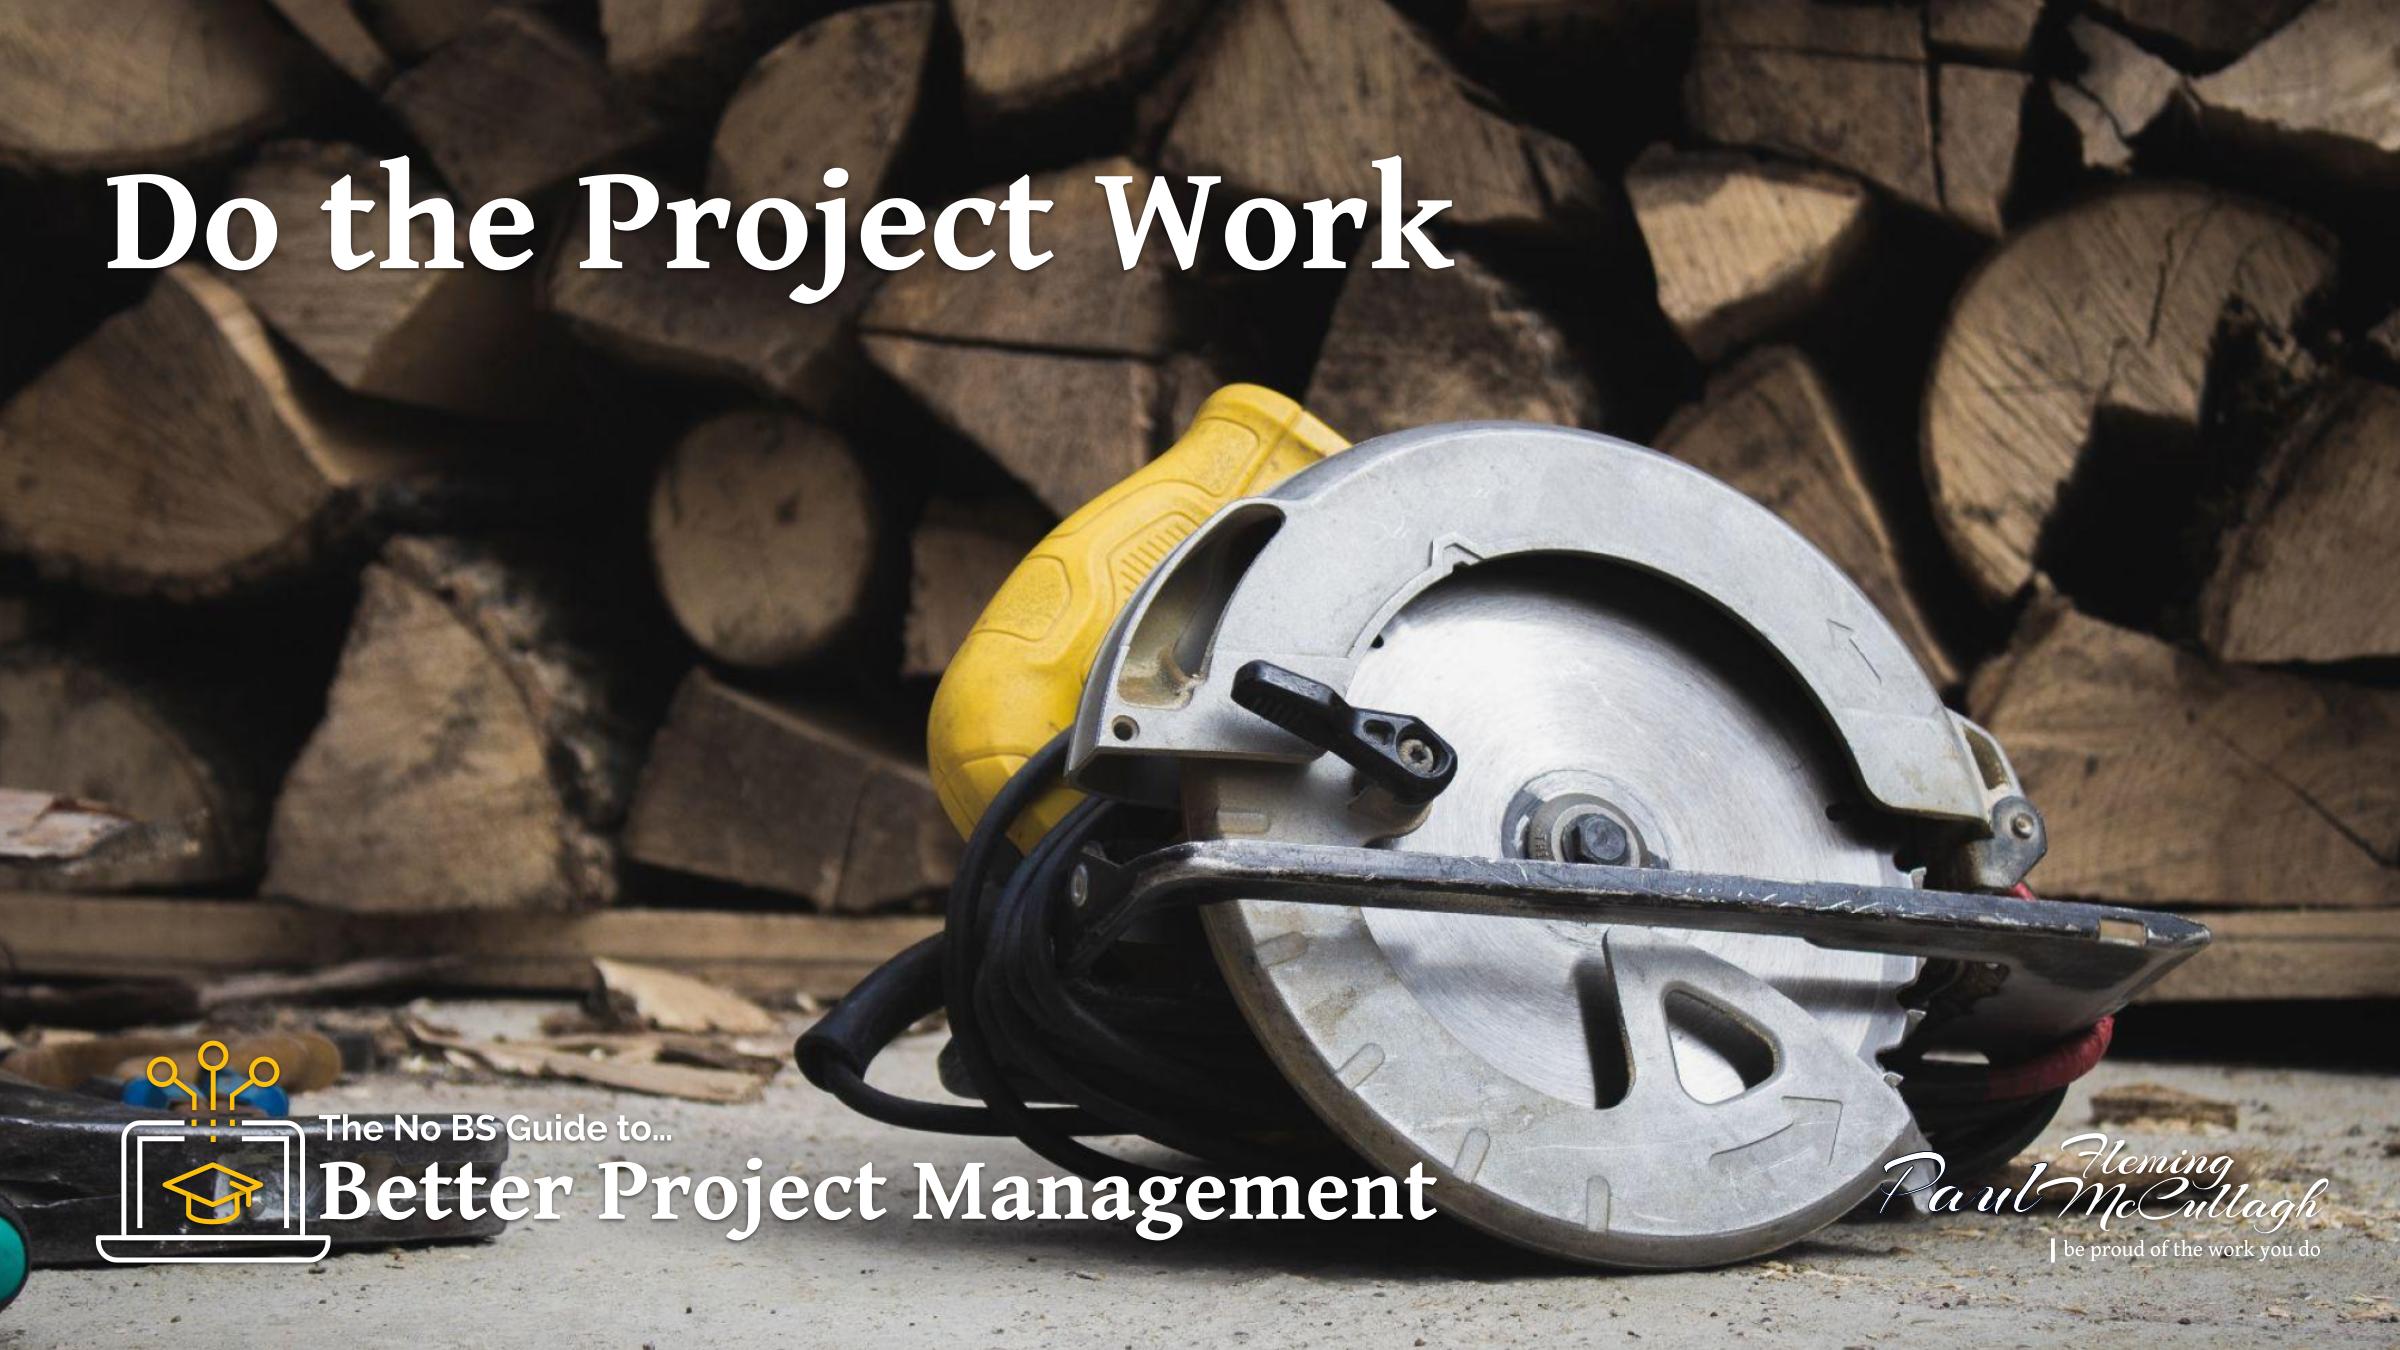 Circular saw in front of split logs, signifying doing the project work